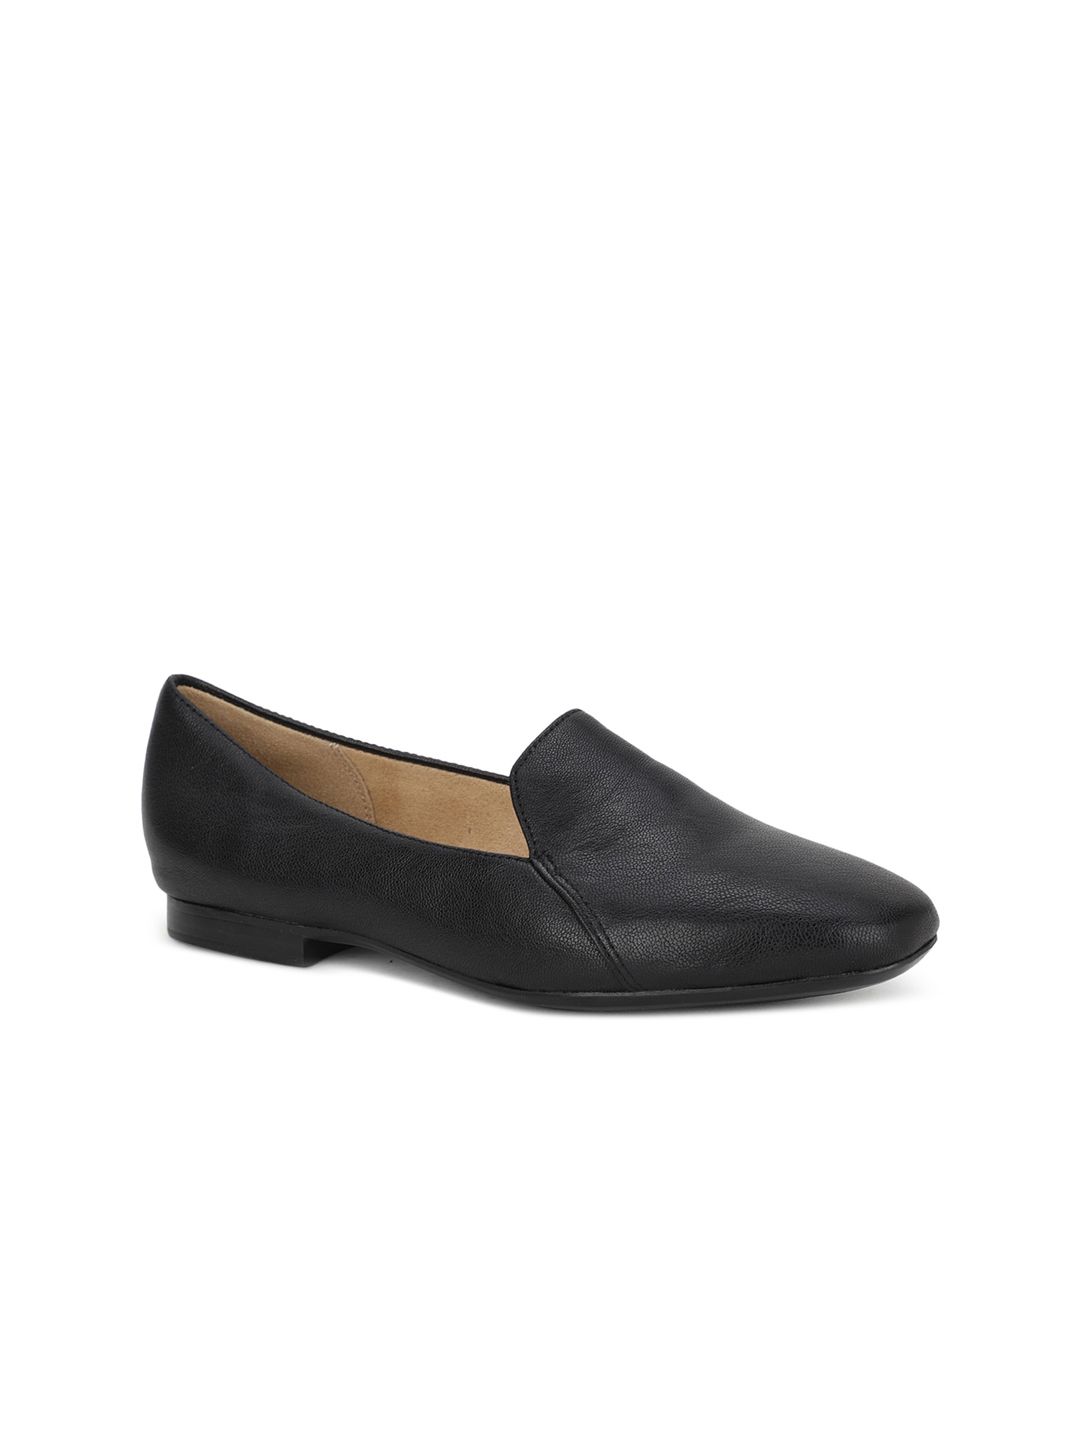 Naturalizer Women Black Leather Loafers Price in India